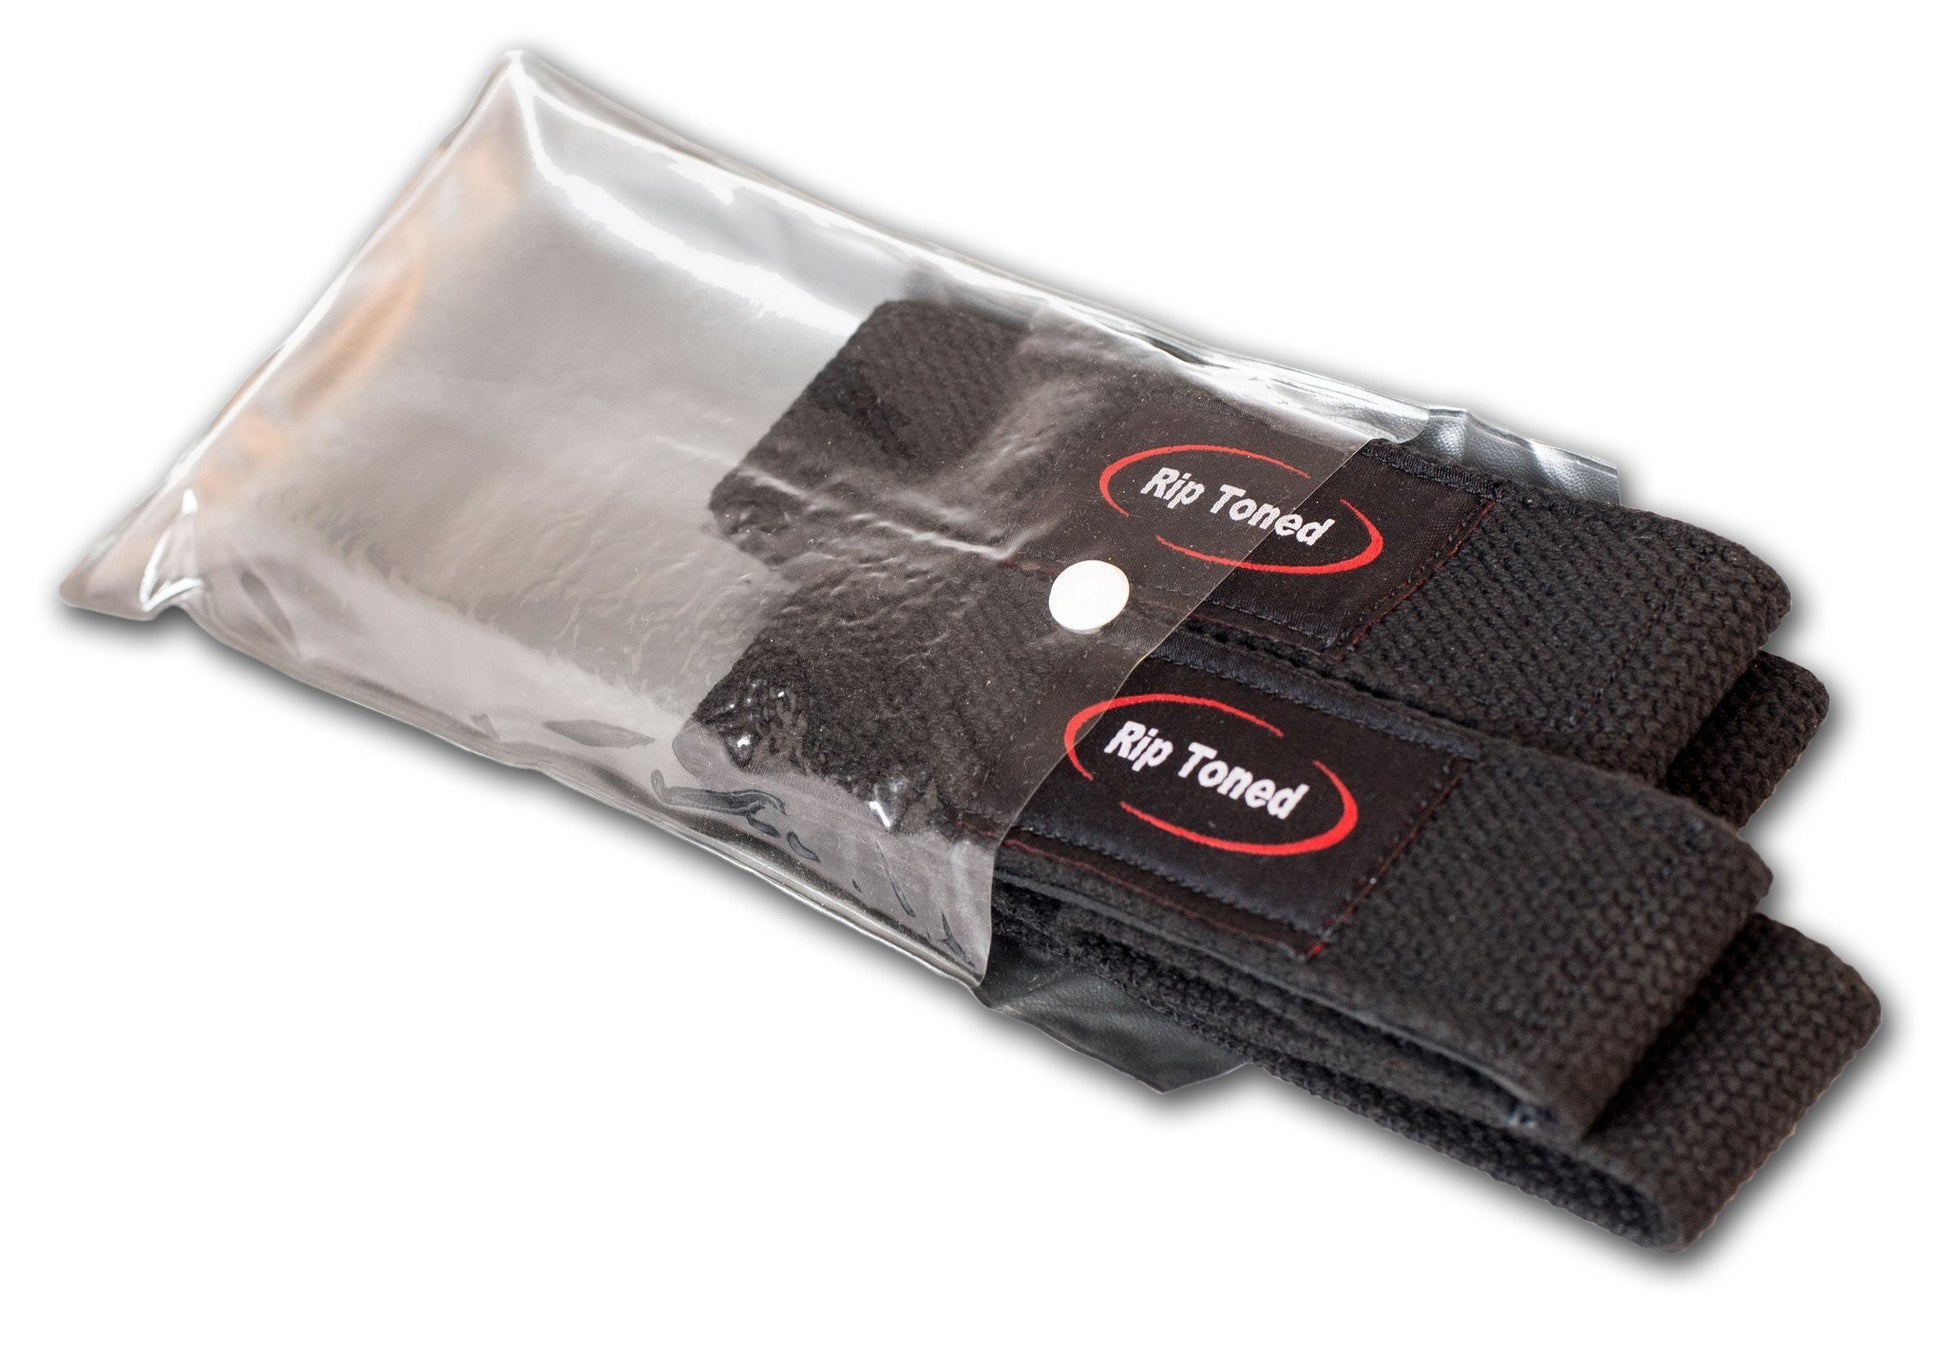 Lifting Straps & Wrist Wraps Combo Pack - Rip Toned